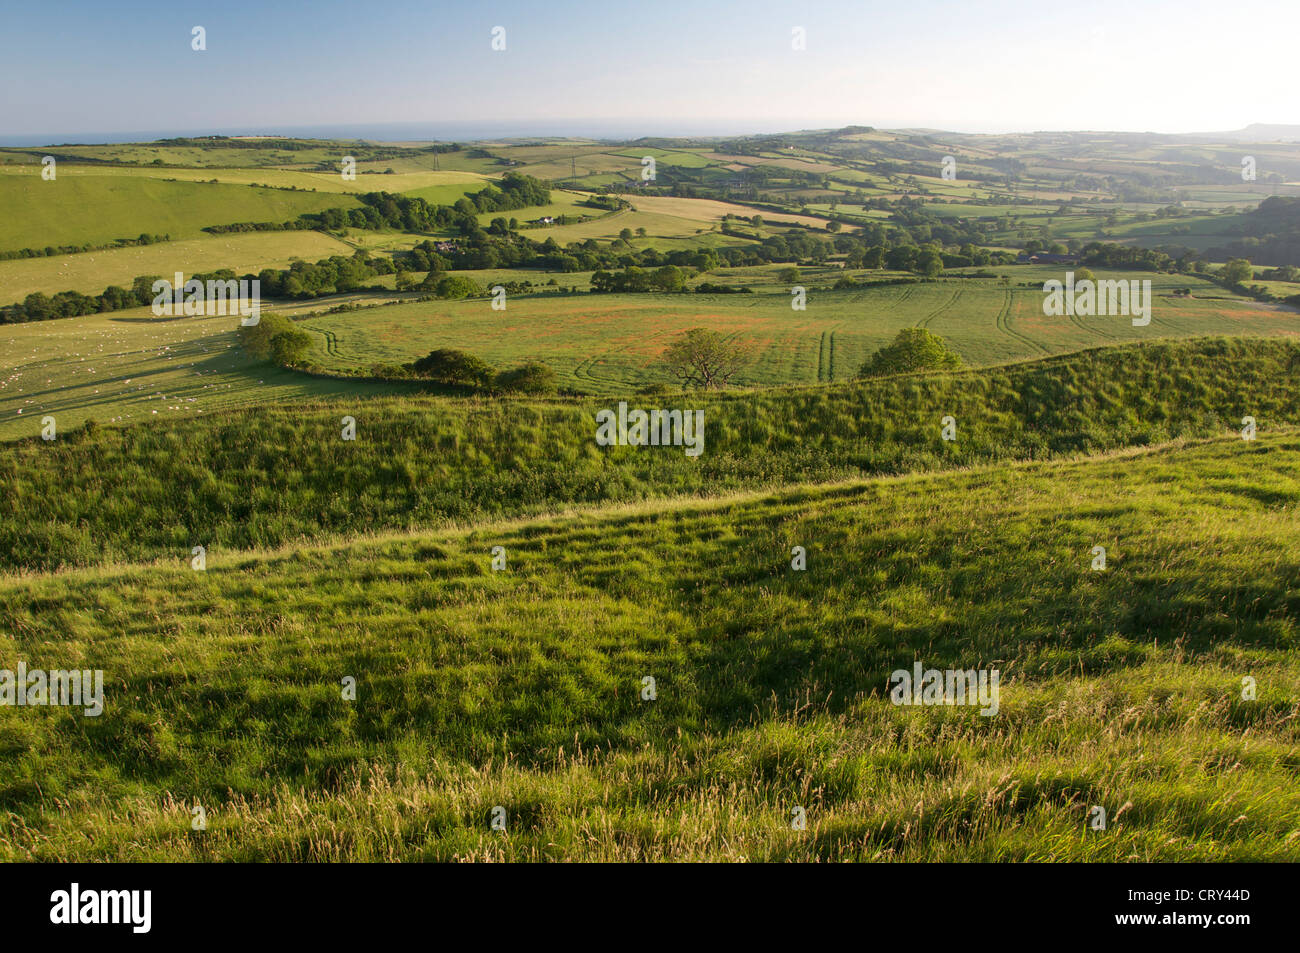 Eggardon Hill is a prehistoric Iron Age hill-fort in Dorset. Lovely views over the gentle countryside reward those who climb its ramparts. England, UK. Stock Photo